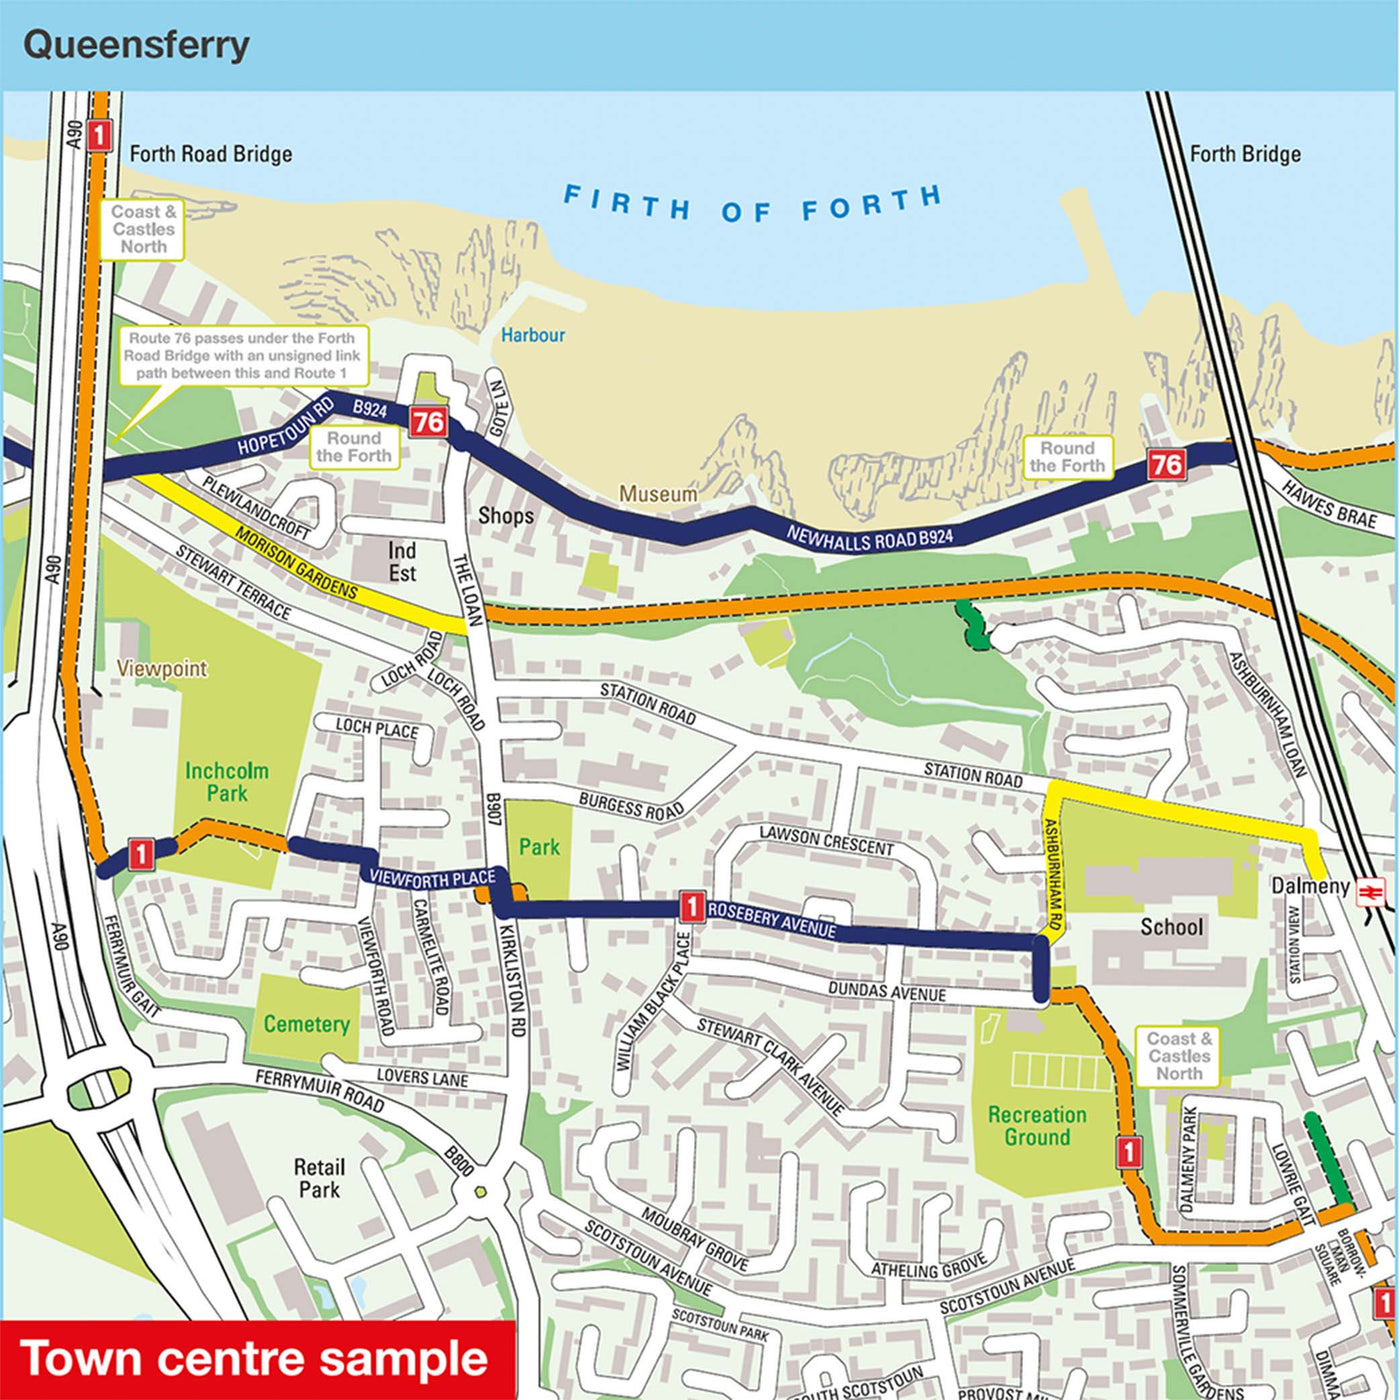 Town centre sample: Queensferry, featuring routes 1 and 76